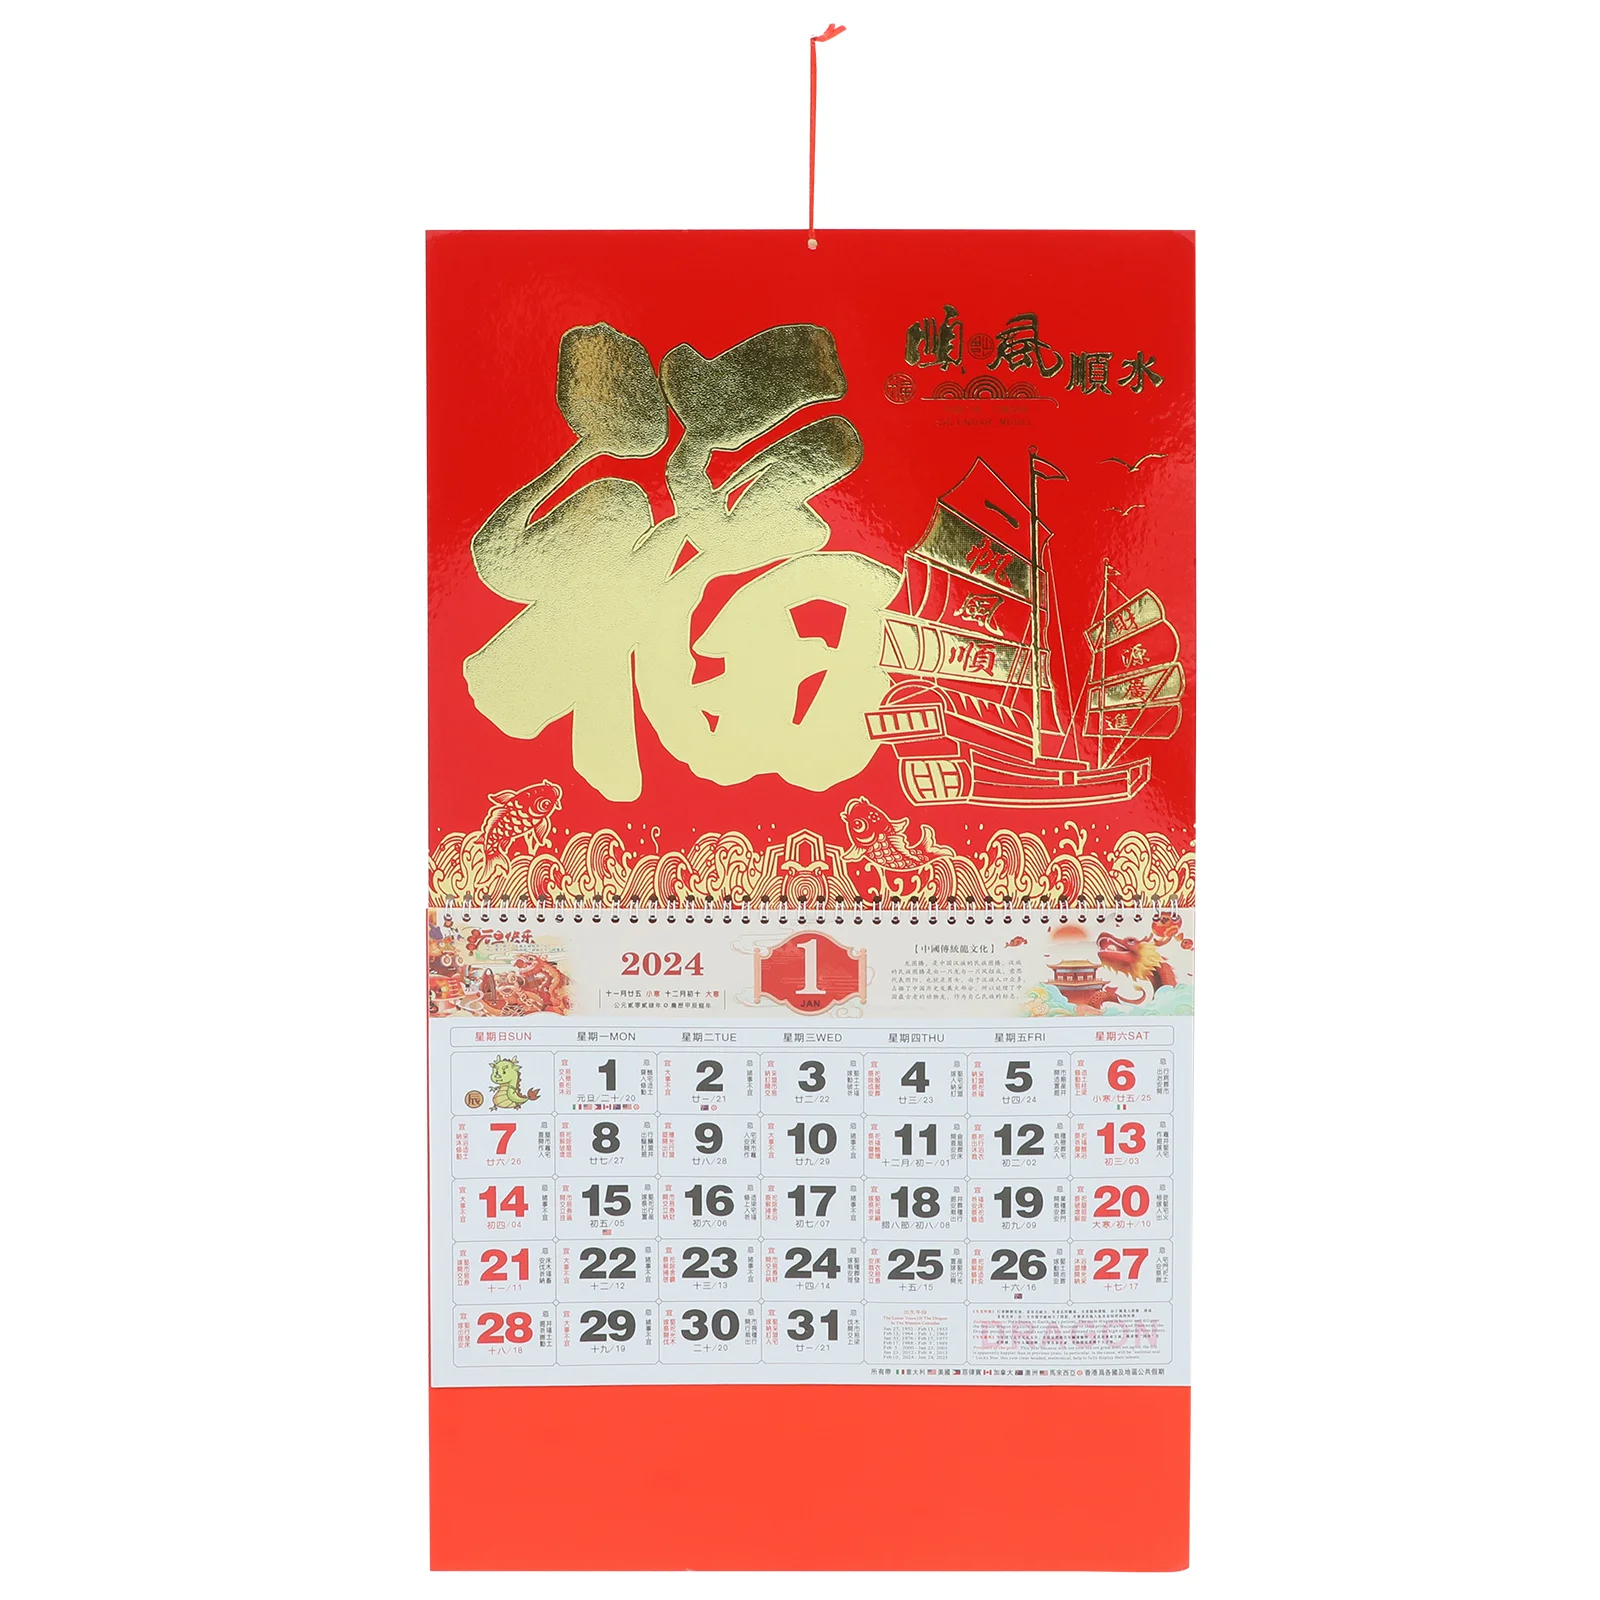 Household Wall Calendar Chinese Dragon 2024 Year Wall Calendar Hanging Wall Calendar Decoration new year wall calendar golden foil year of dragon 2024 wall calendar traditional chinese new year monthly hanging decoration